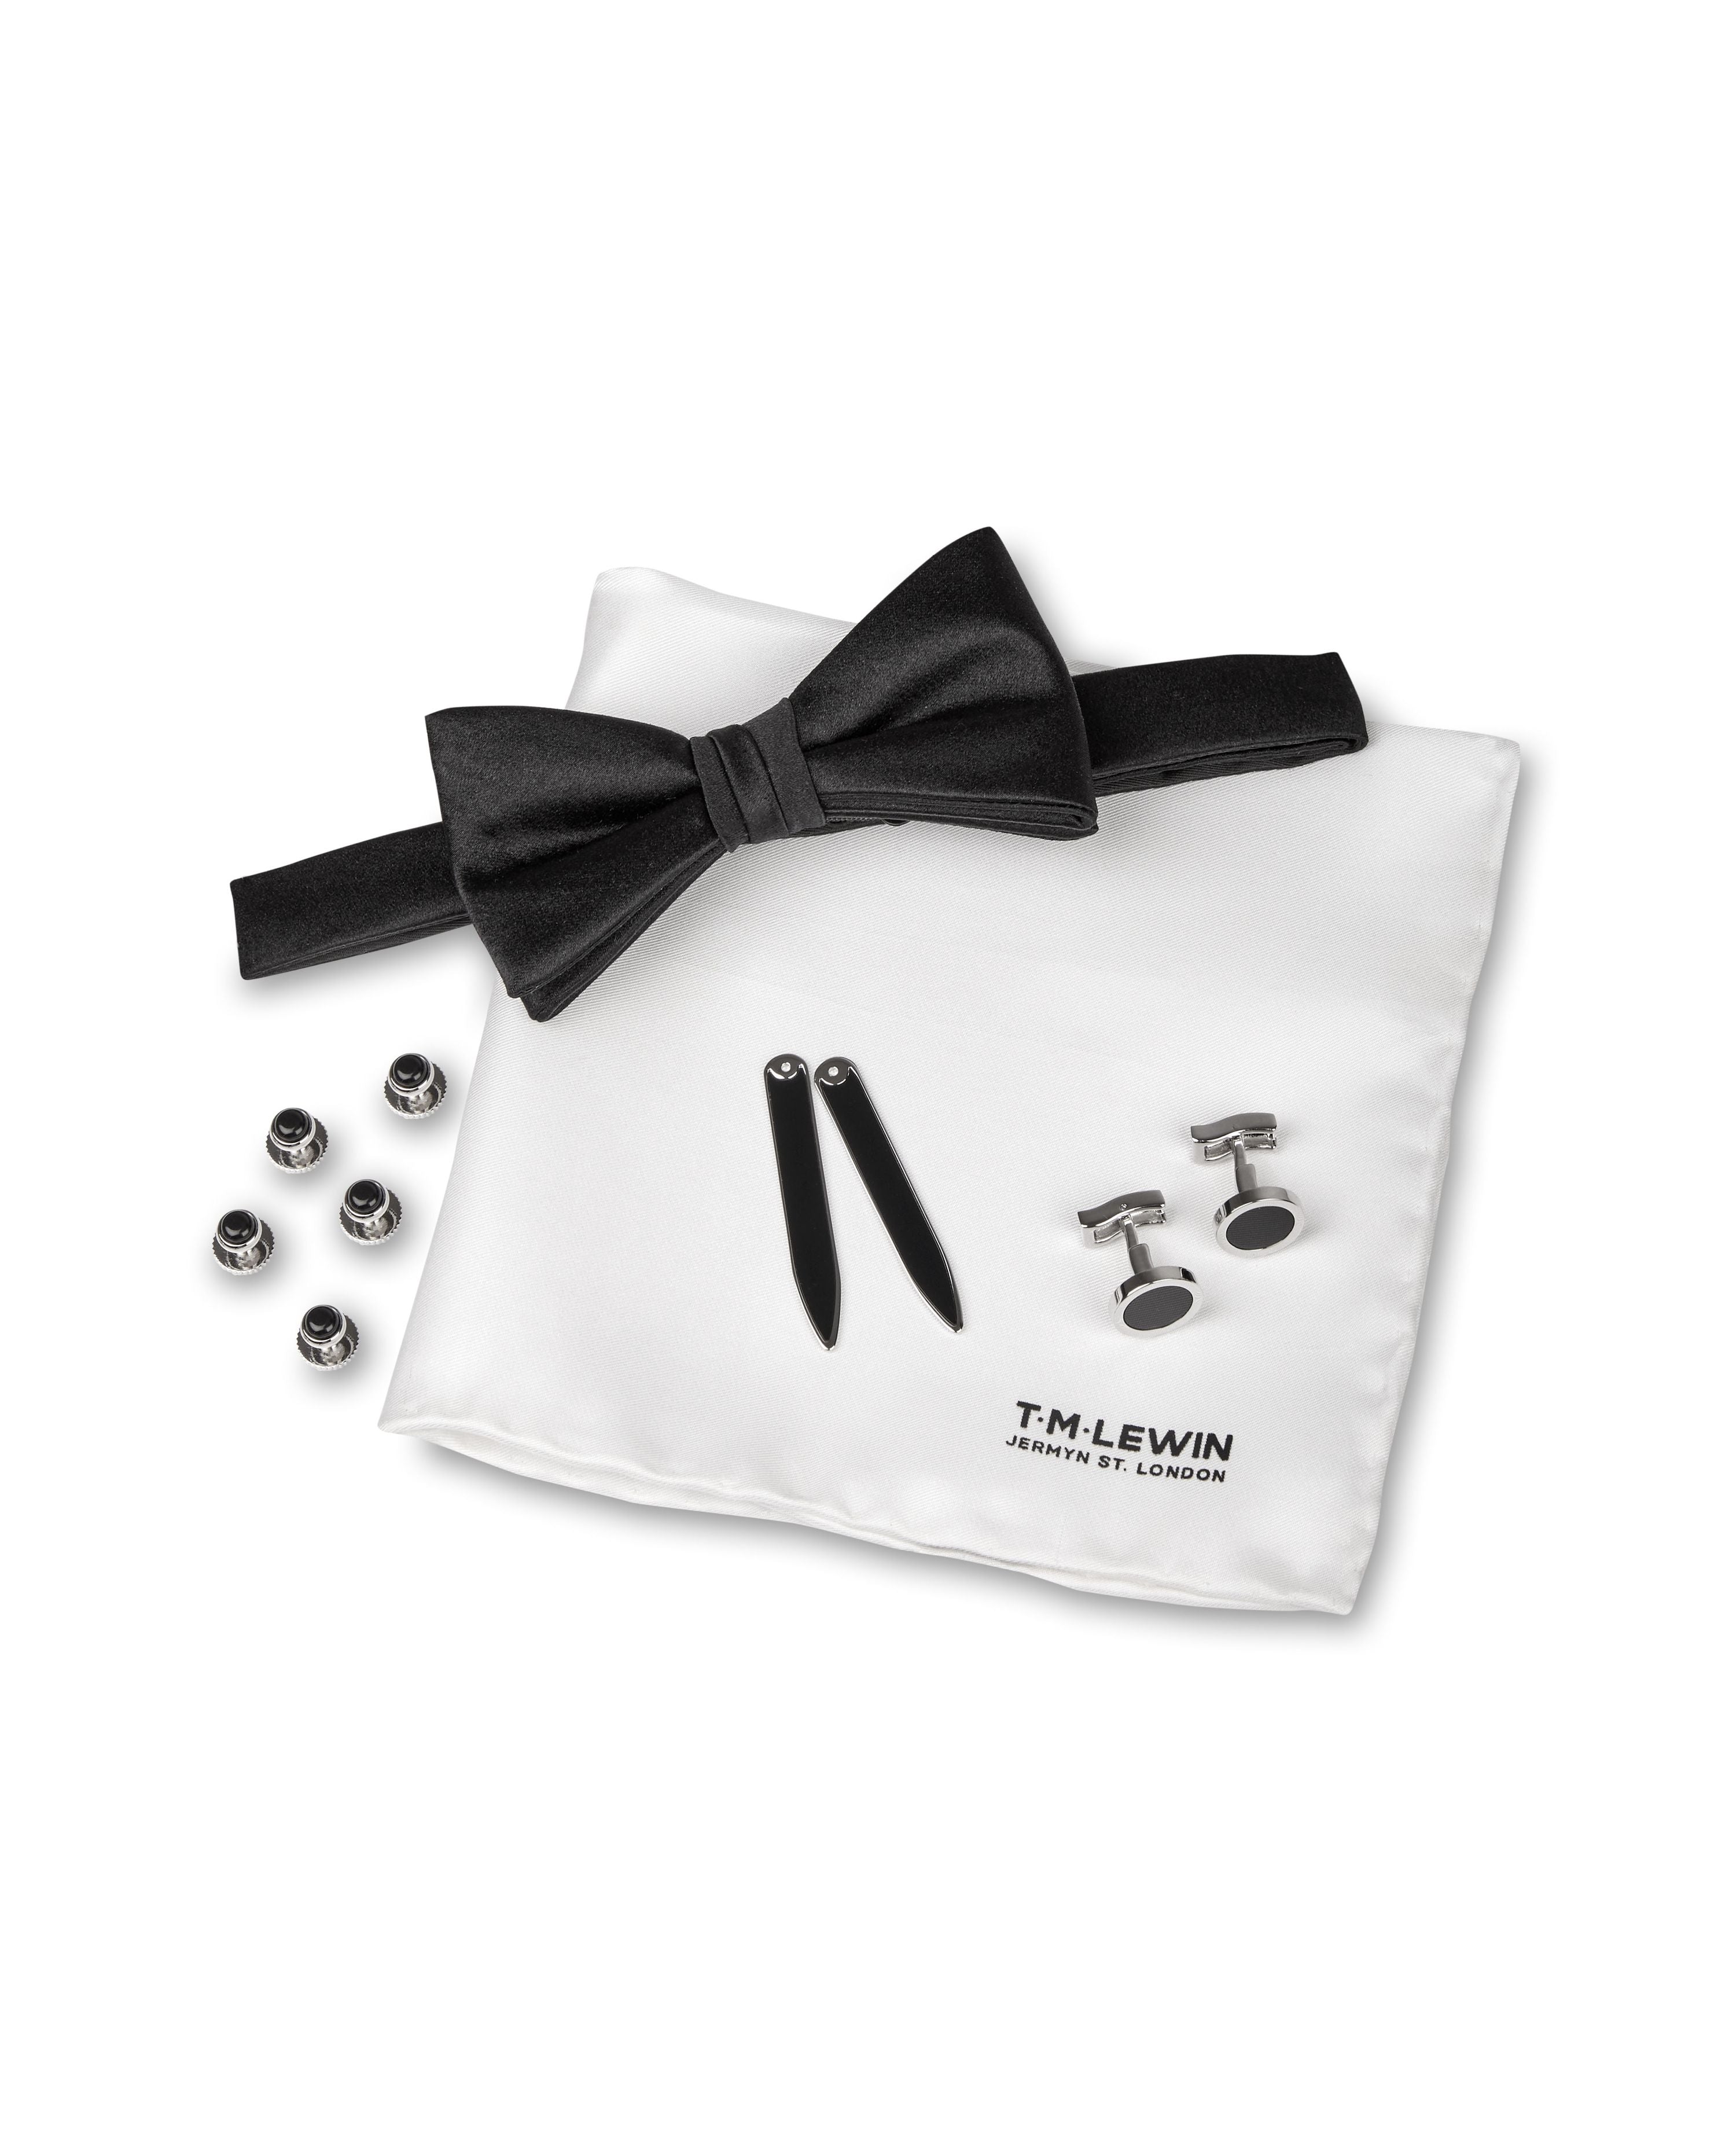 Mens Tie Set With Gift Box, Bowtie, Pocket Square, Brooch, And Ties And  Cufflinks Sets Perfect For Business, Weddings, Parties, Or Formal Events  From Us_nevada, $7.1 | DHgate.Com